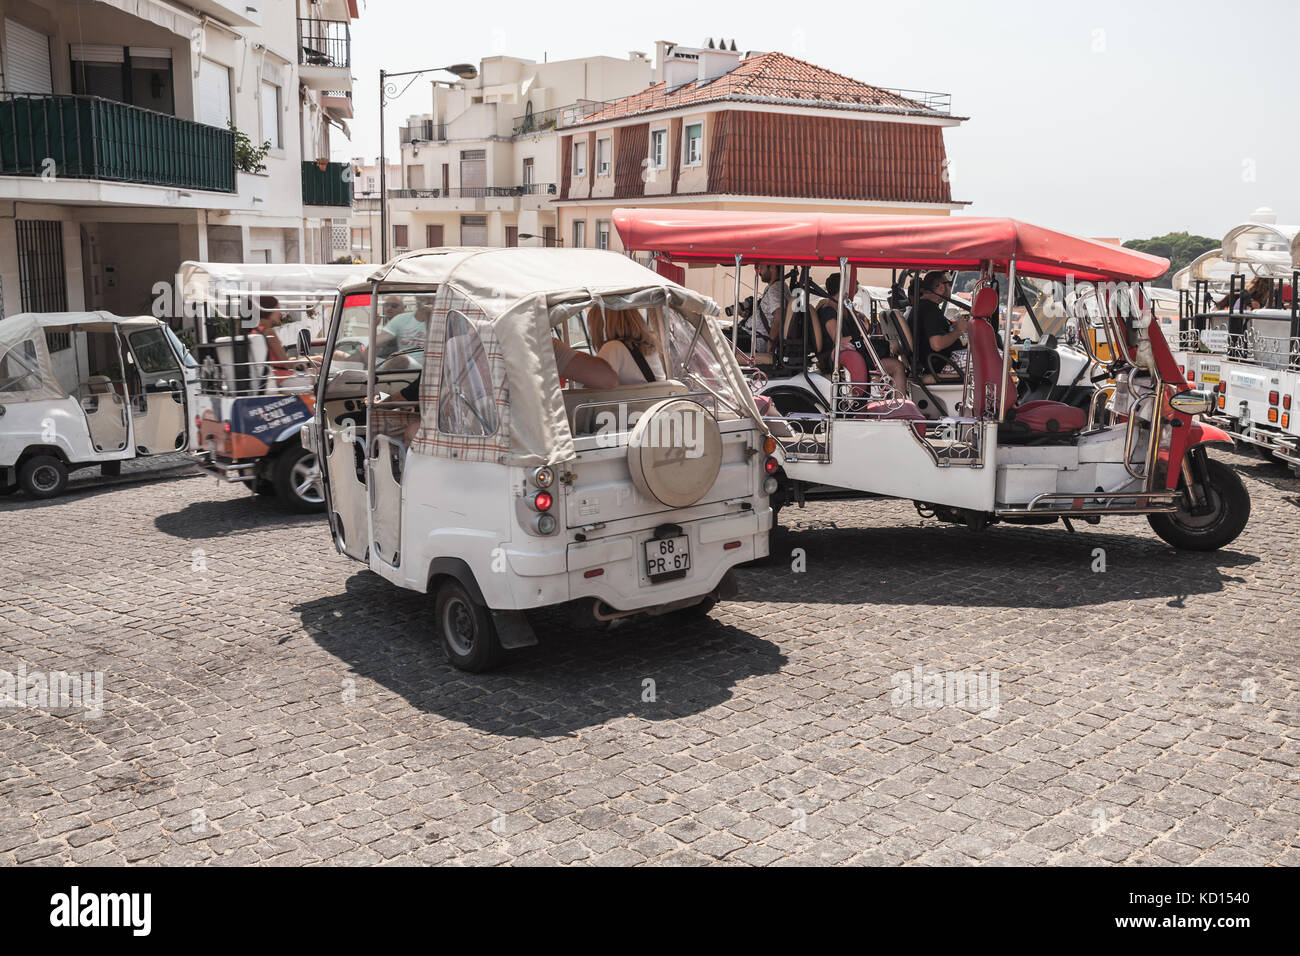 Lisbon, Portugal - August 13, 2017: Tuk Tuk taxi cabs of Lisbon stand on a city square with tourists as a passengers. Piaggio Ape three-wheeled light  Stock Photo